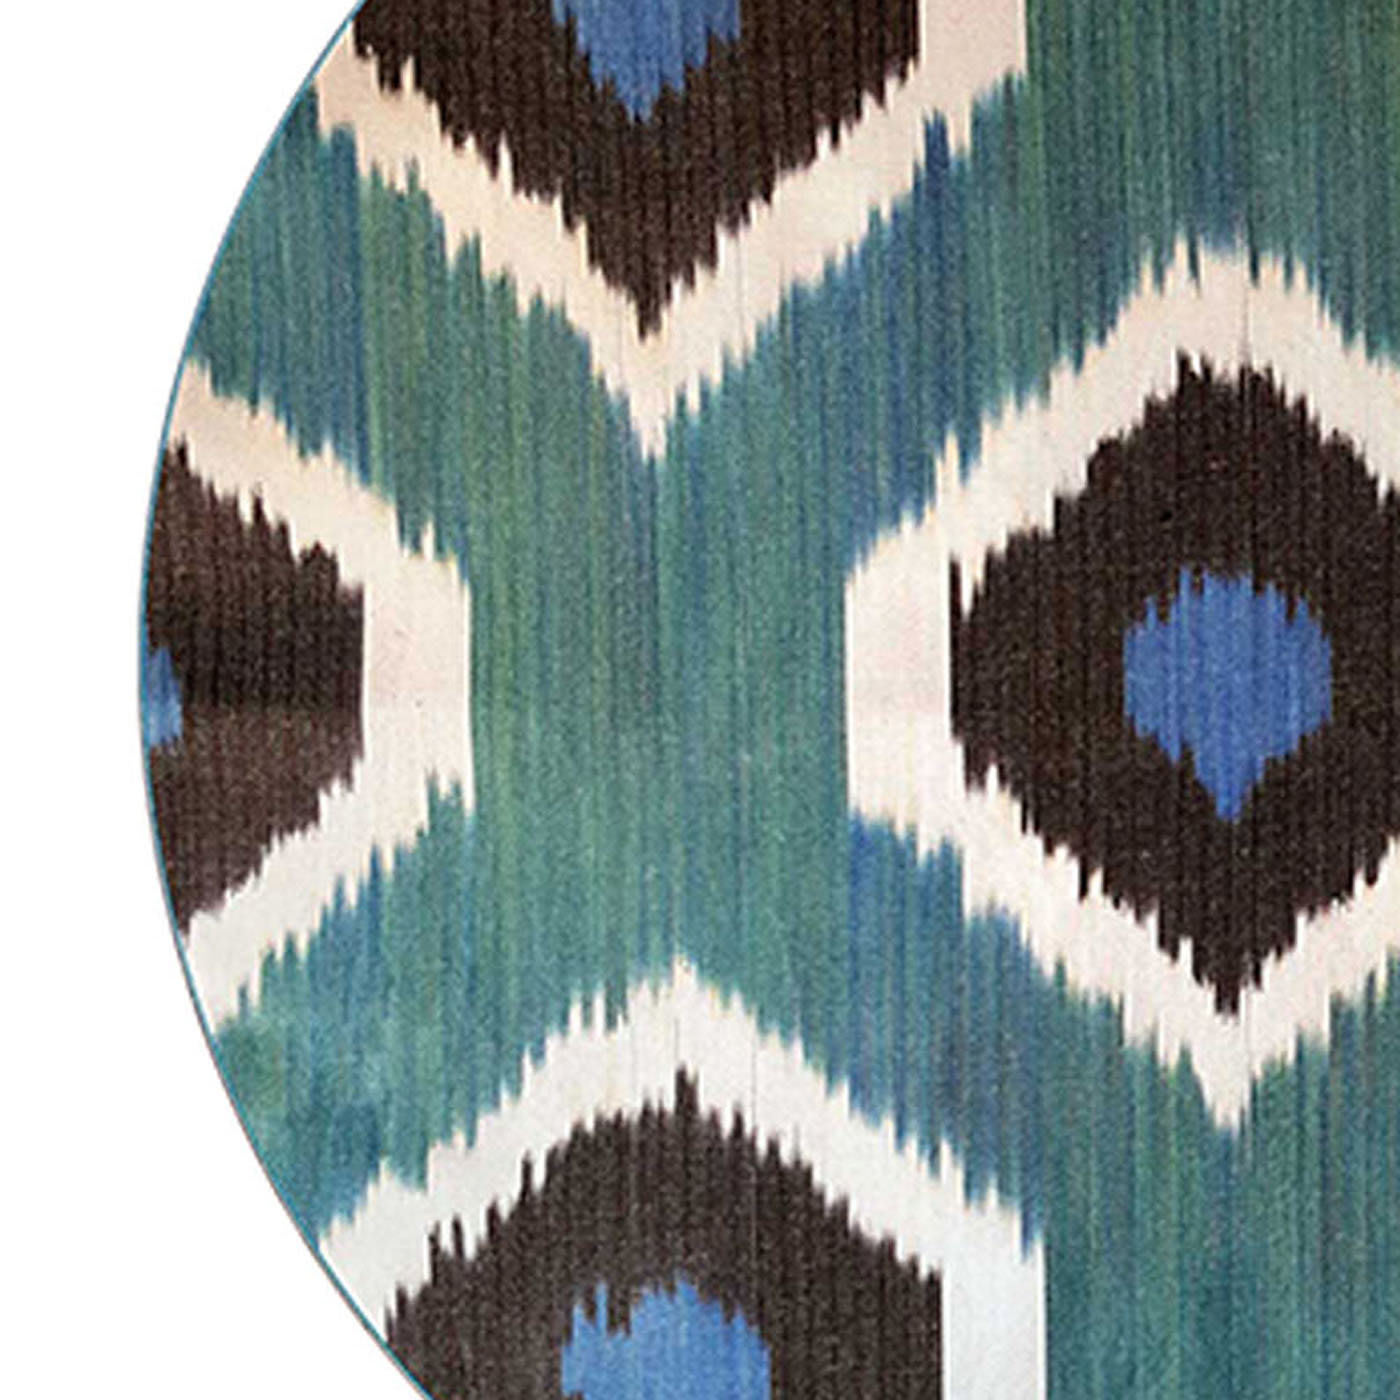 Set of 6 Ikat Porcelain Plates in Blue and Green and White - Les Ottomans